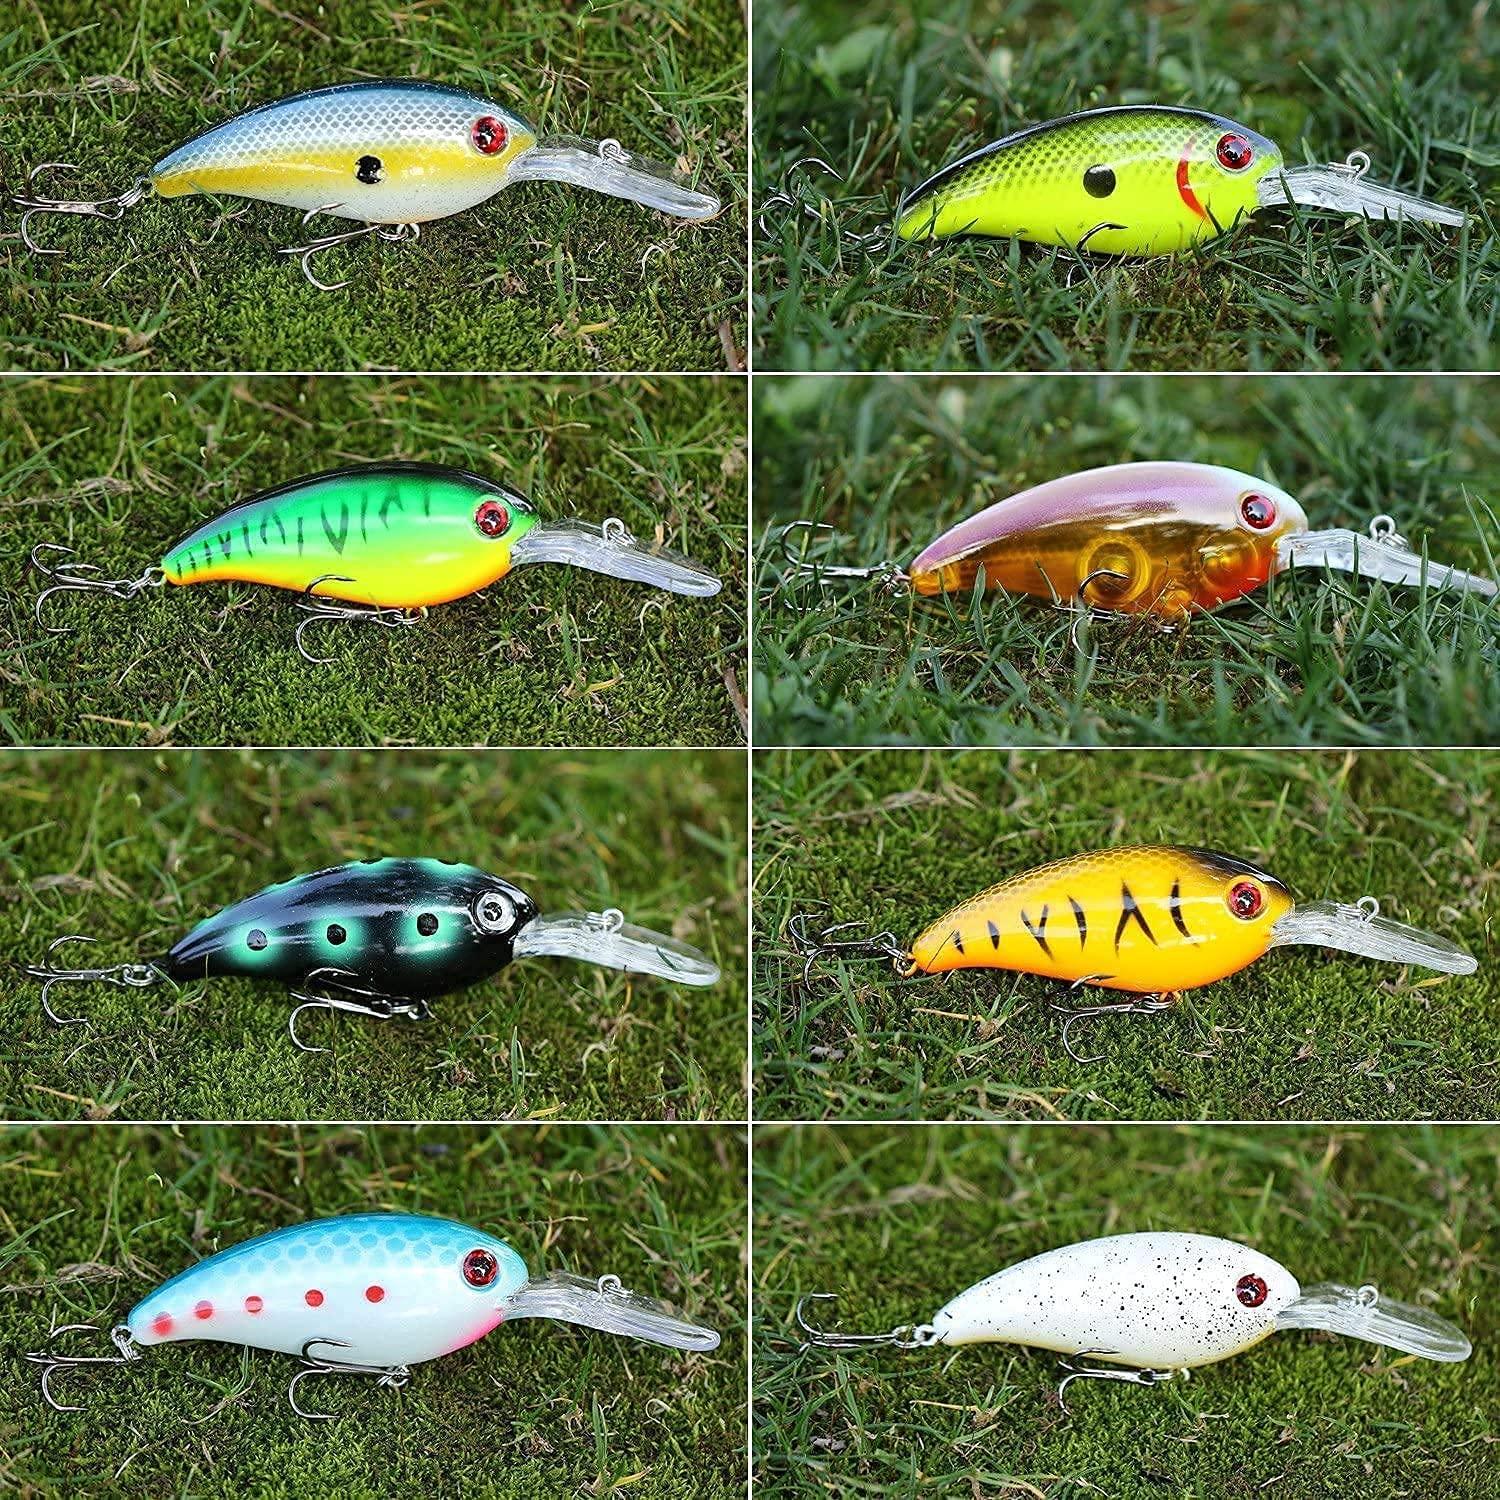 YONGZHI Fishing Lures Shallow Deep Diving Swimbait Crankbait Fishing Wobble  Multi Jointed Hard Baits for Bass Trout Freshwater and Saltwater Deep  diving crankbaits-8pcs